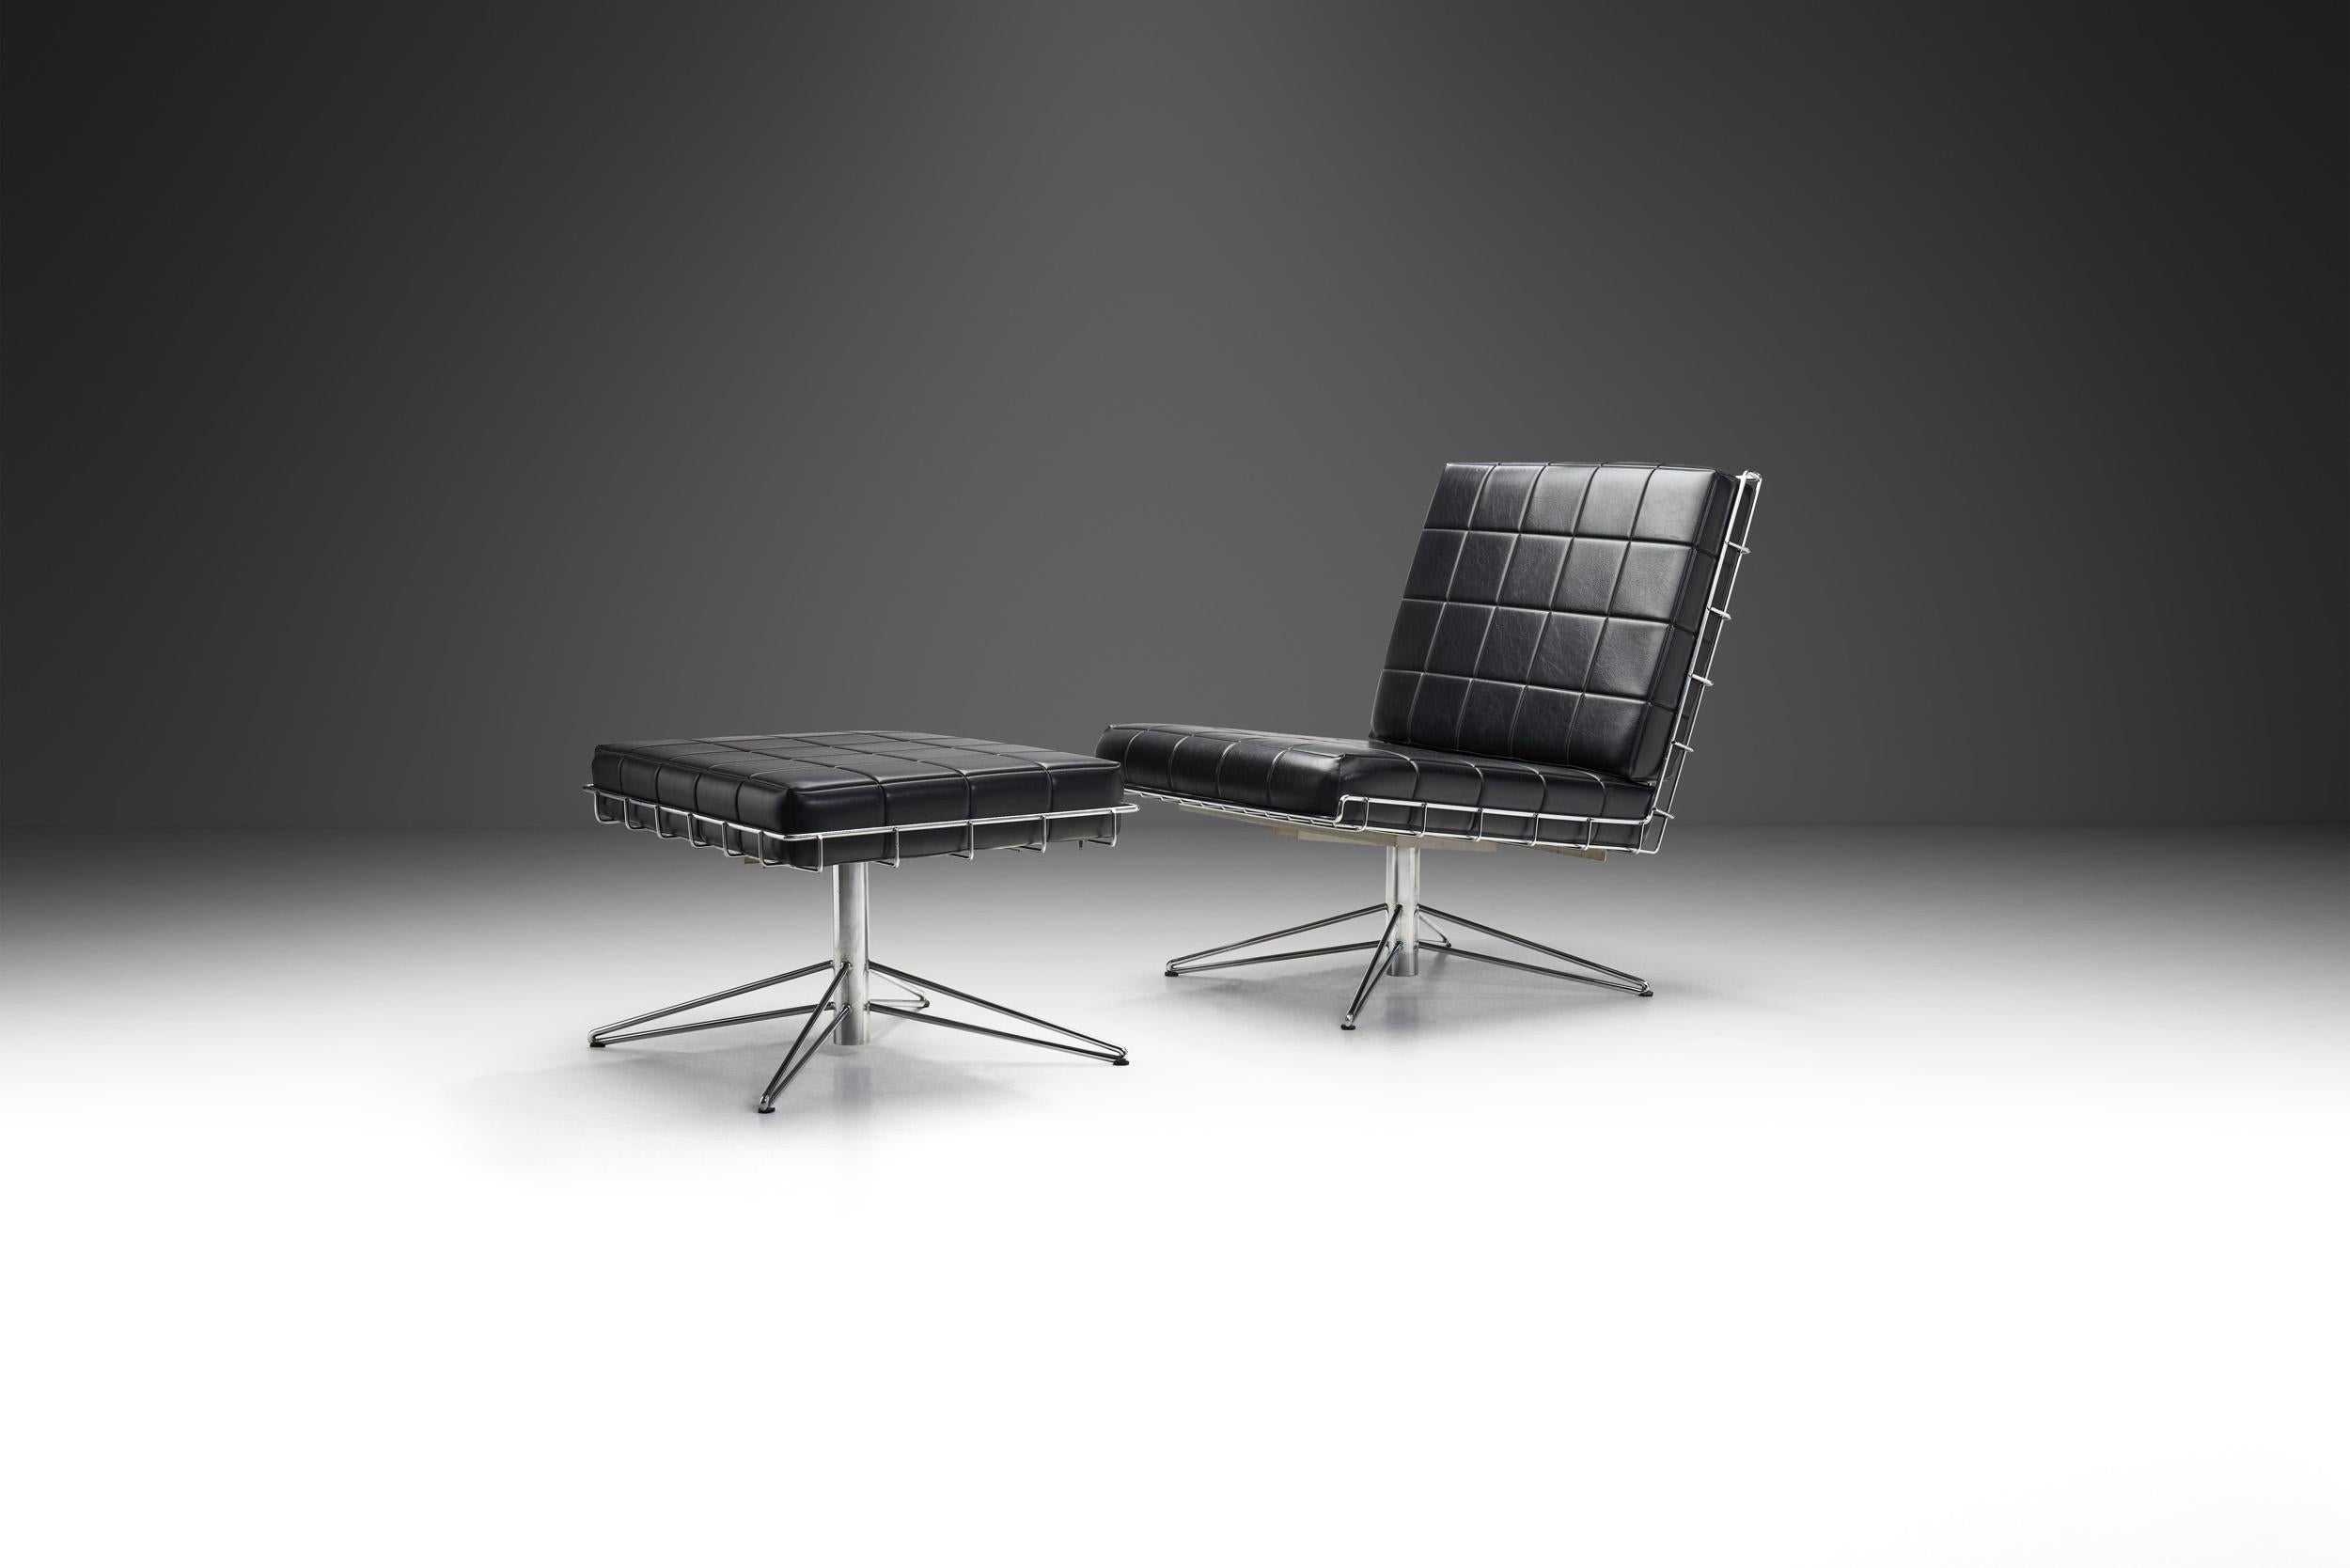 Crafted with meticulous attention to detail, this chair and footstool pair exudes both elemental modern elegance and comfort, making it a timeless and stylish addition to any interior space. The sleek chrome frames offer a striking contrast to the